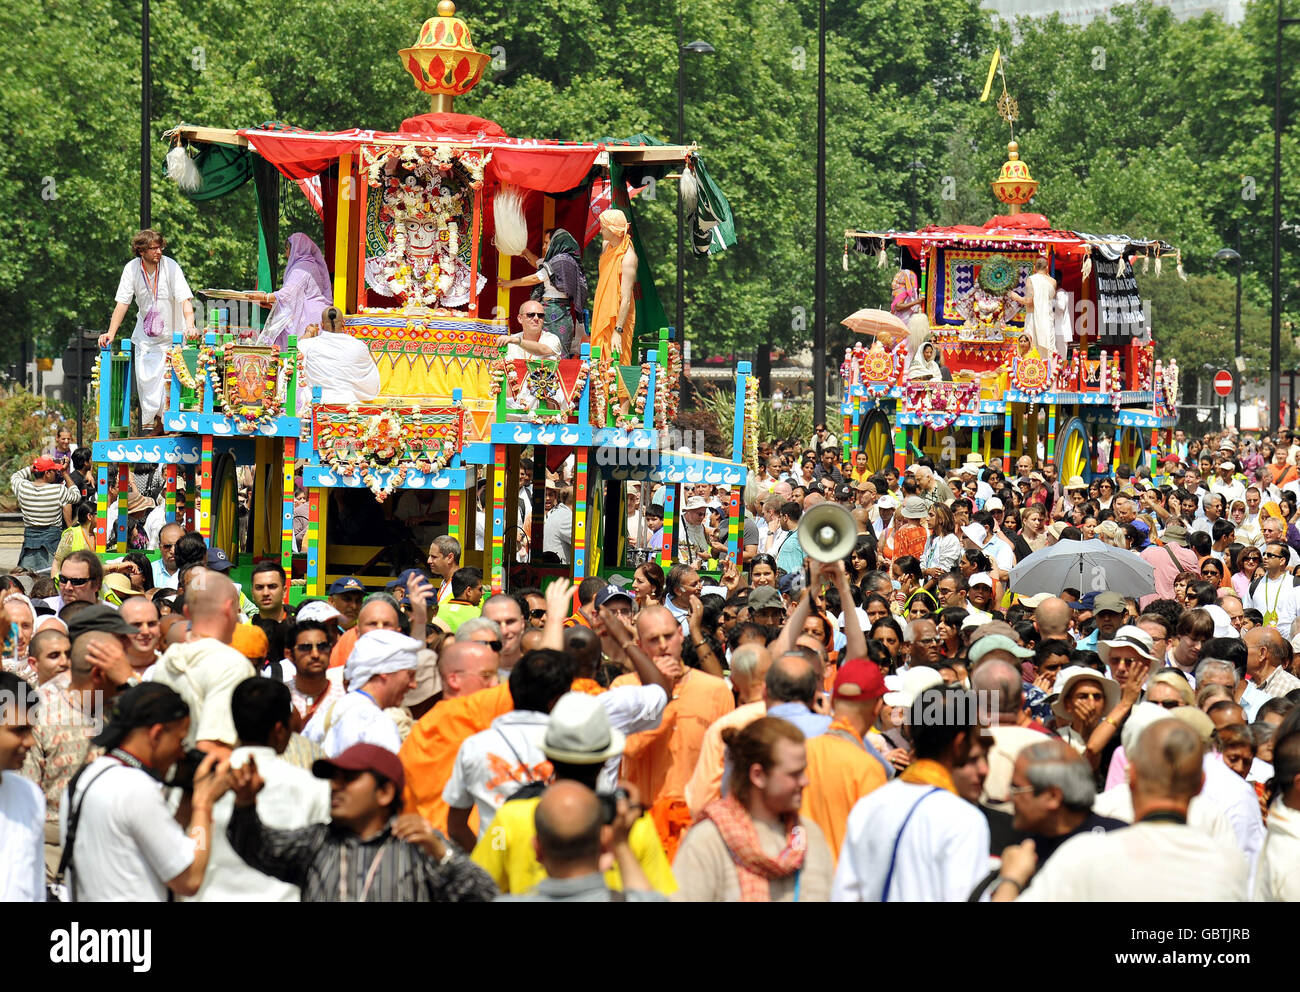 A small part of the large group of Hare Krishna devotees, help to pull three giant decorative wheeled shrines, from Hyde Park to Trafalgar Square to celebrate the 'Ratha-yatra' Festival. Stock Photo